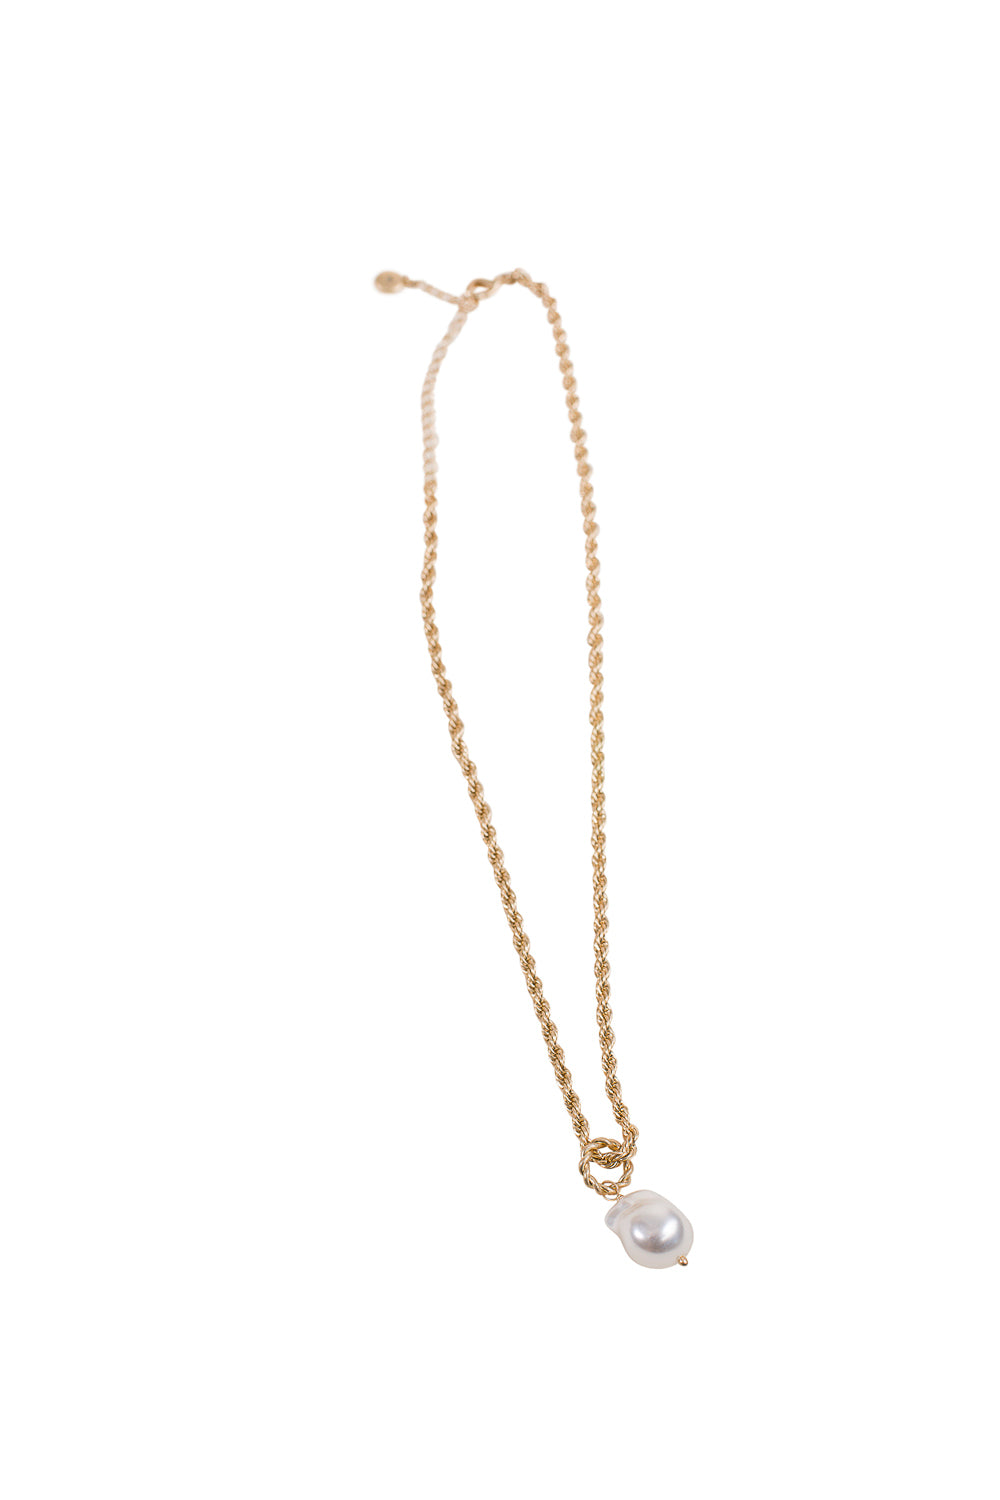 Gold Rope Necklace W/ Pearl